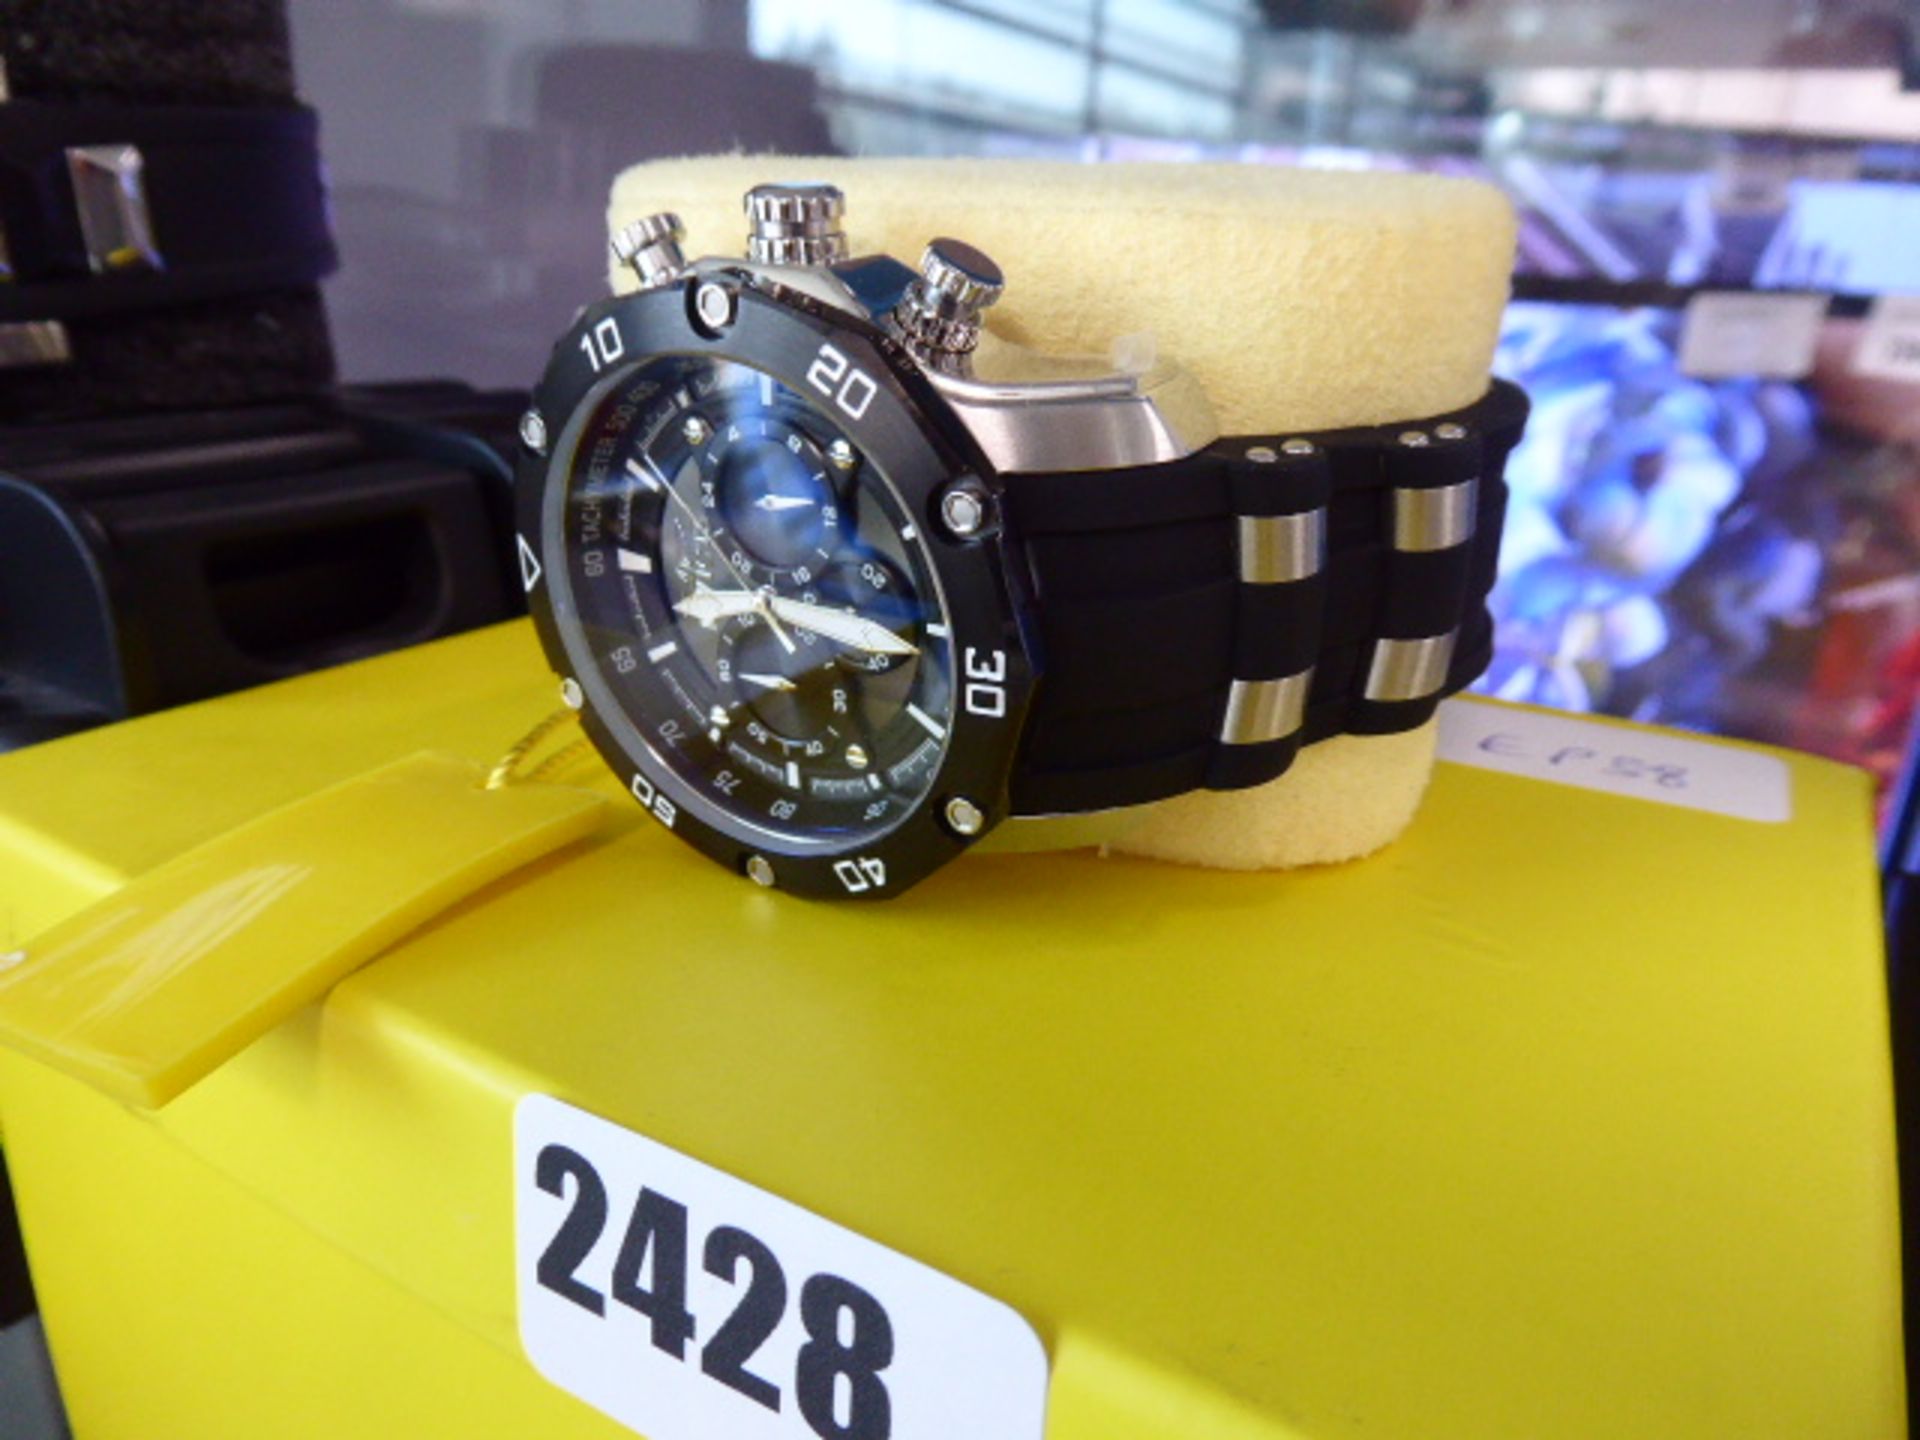 A gents Oversize Invicta wristwatch with rubberized strap in box